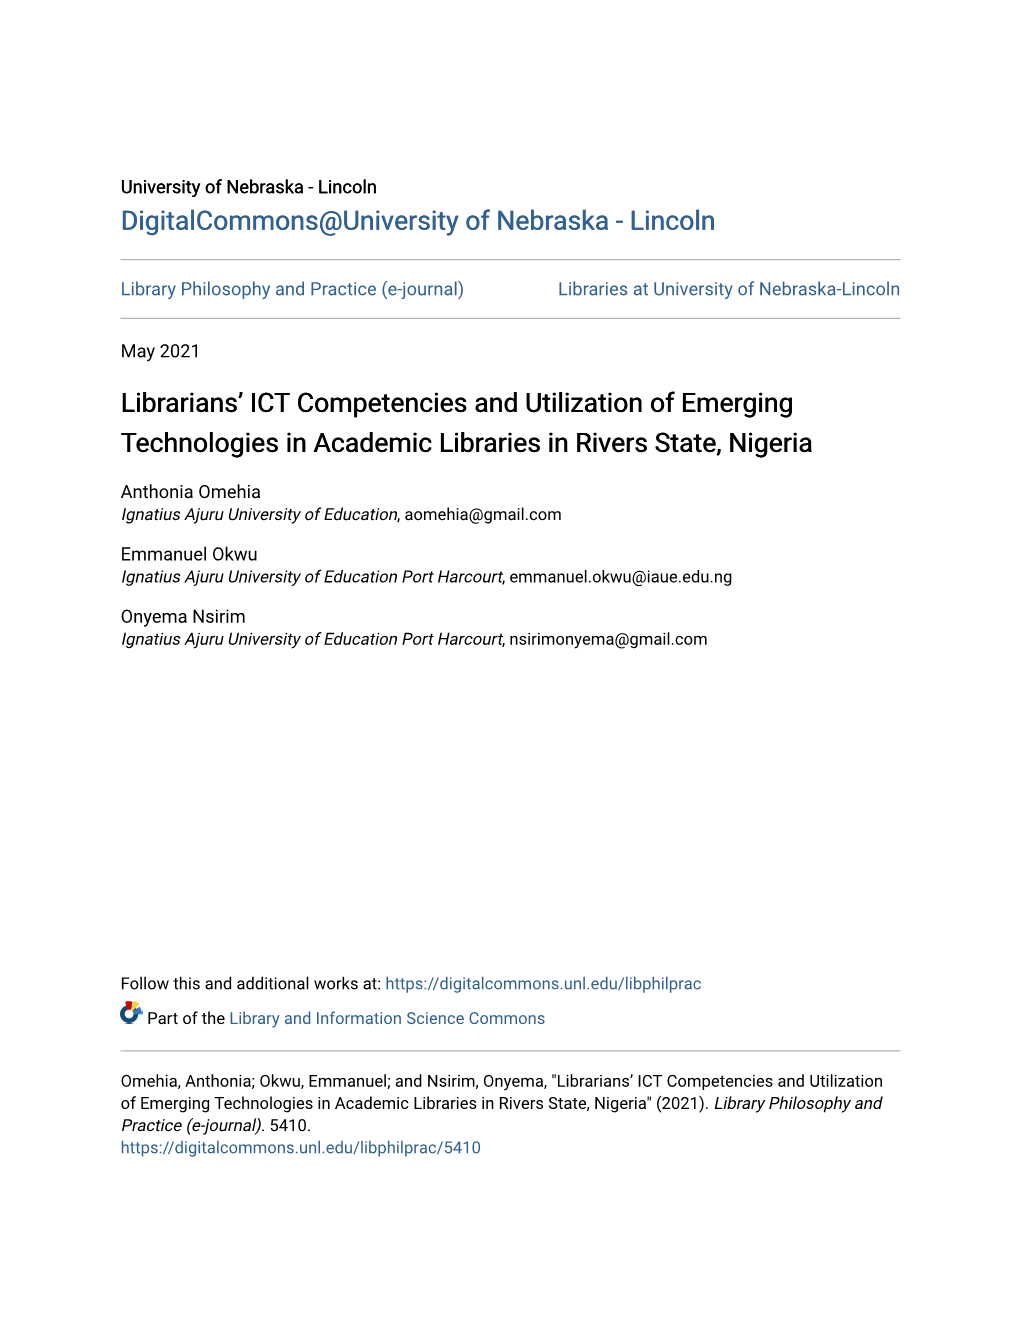 Librarians' ICT Competencies and Utilization of Emerging